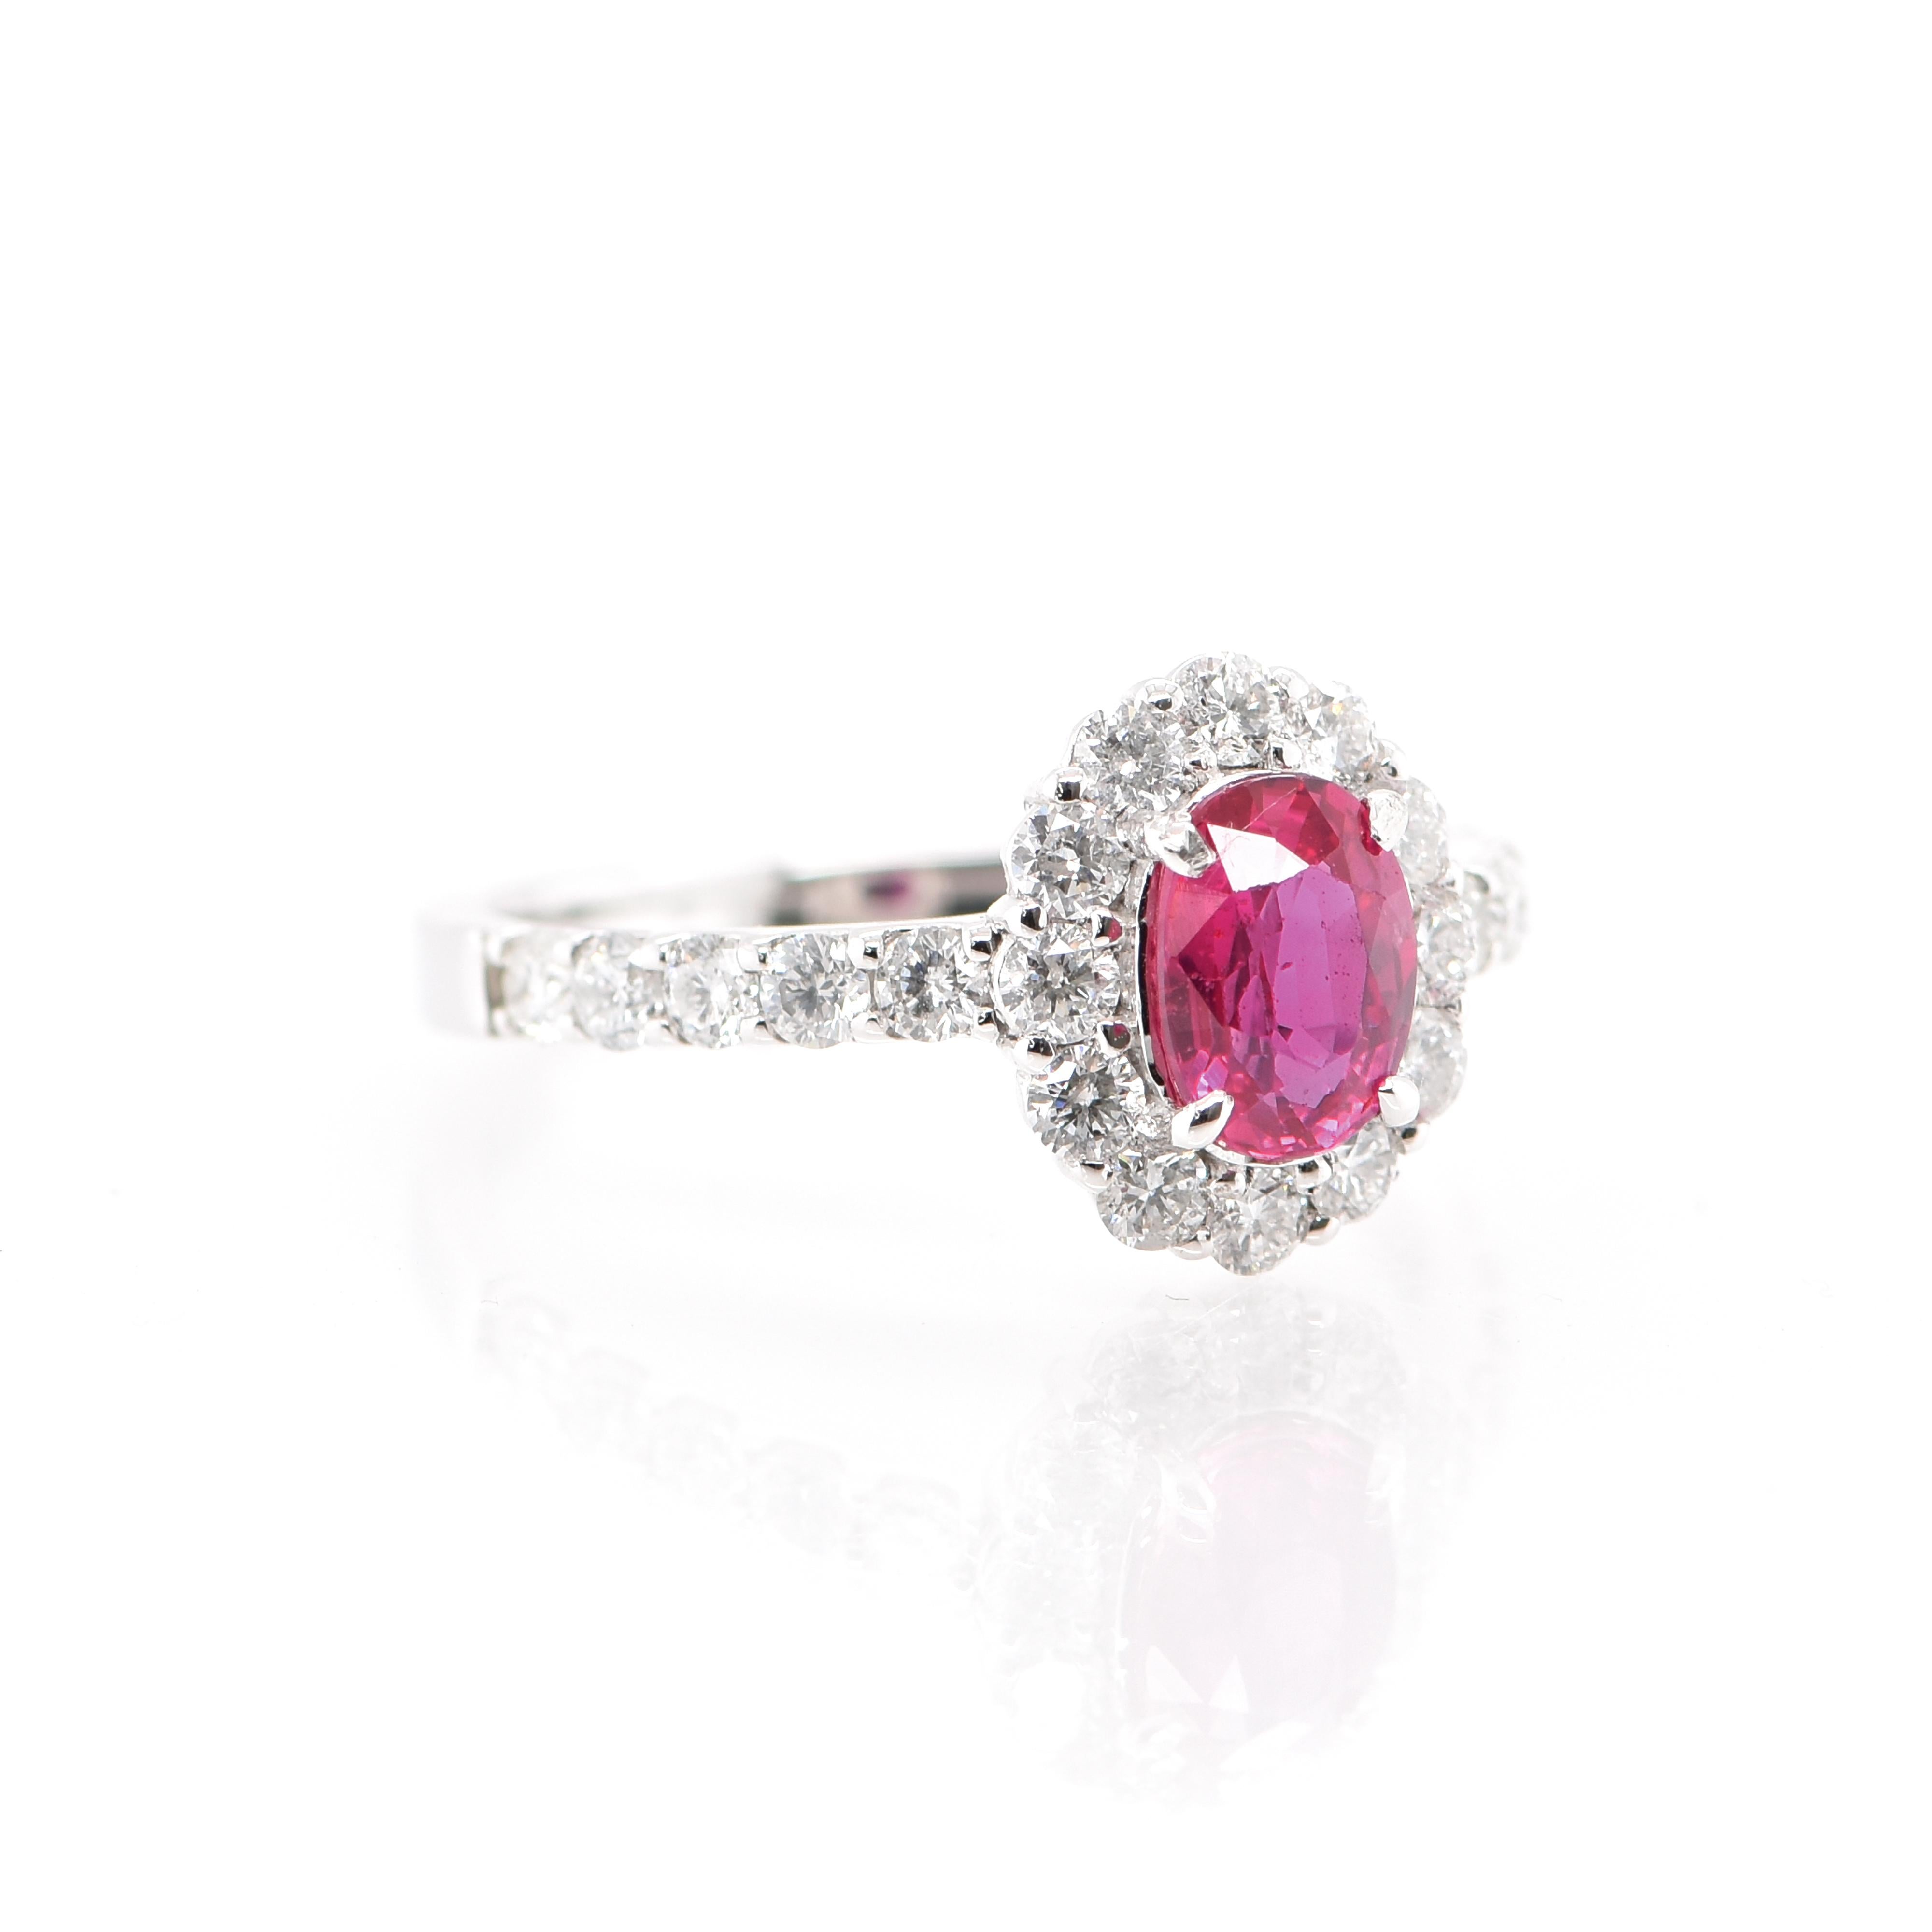 Modern 1.07 Carat Natural Untreated 'No Heat' Ruby and Diamond Ring Set in Platinum